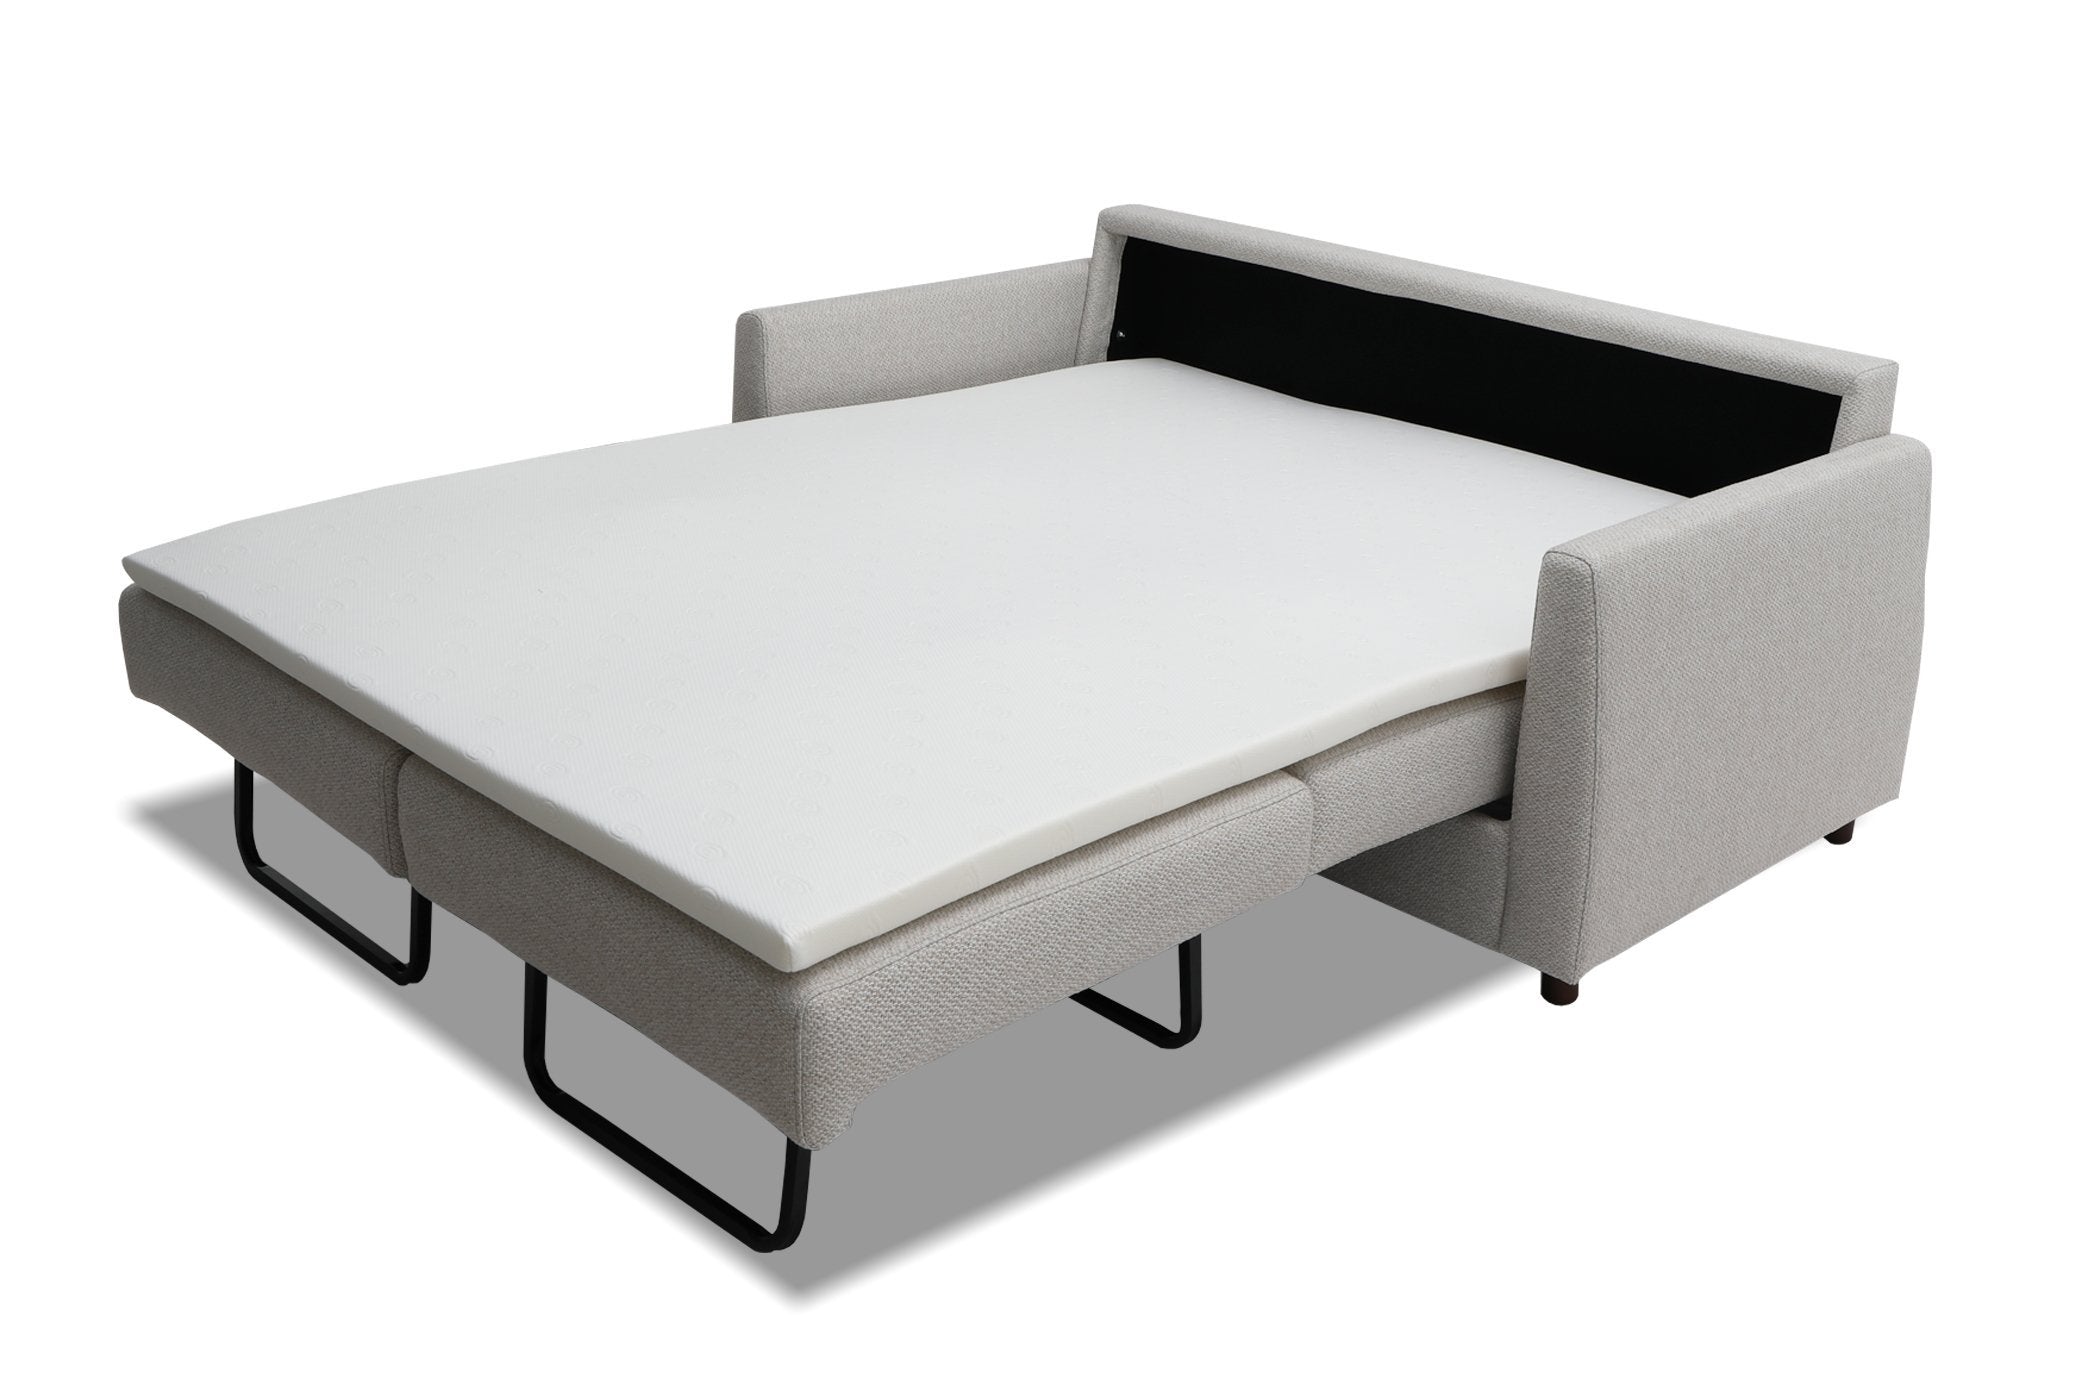 Sofa Bed Mattress Topper  Sofa bed mattress, Mattress couch, Sofa bed with  storage